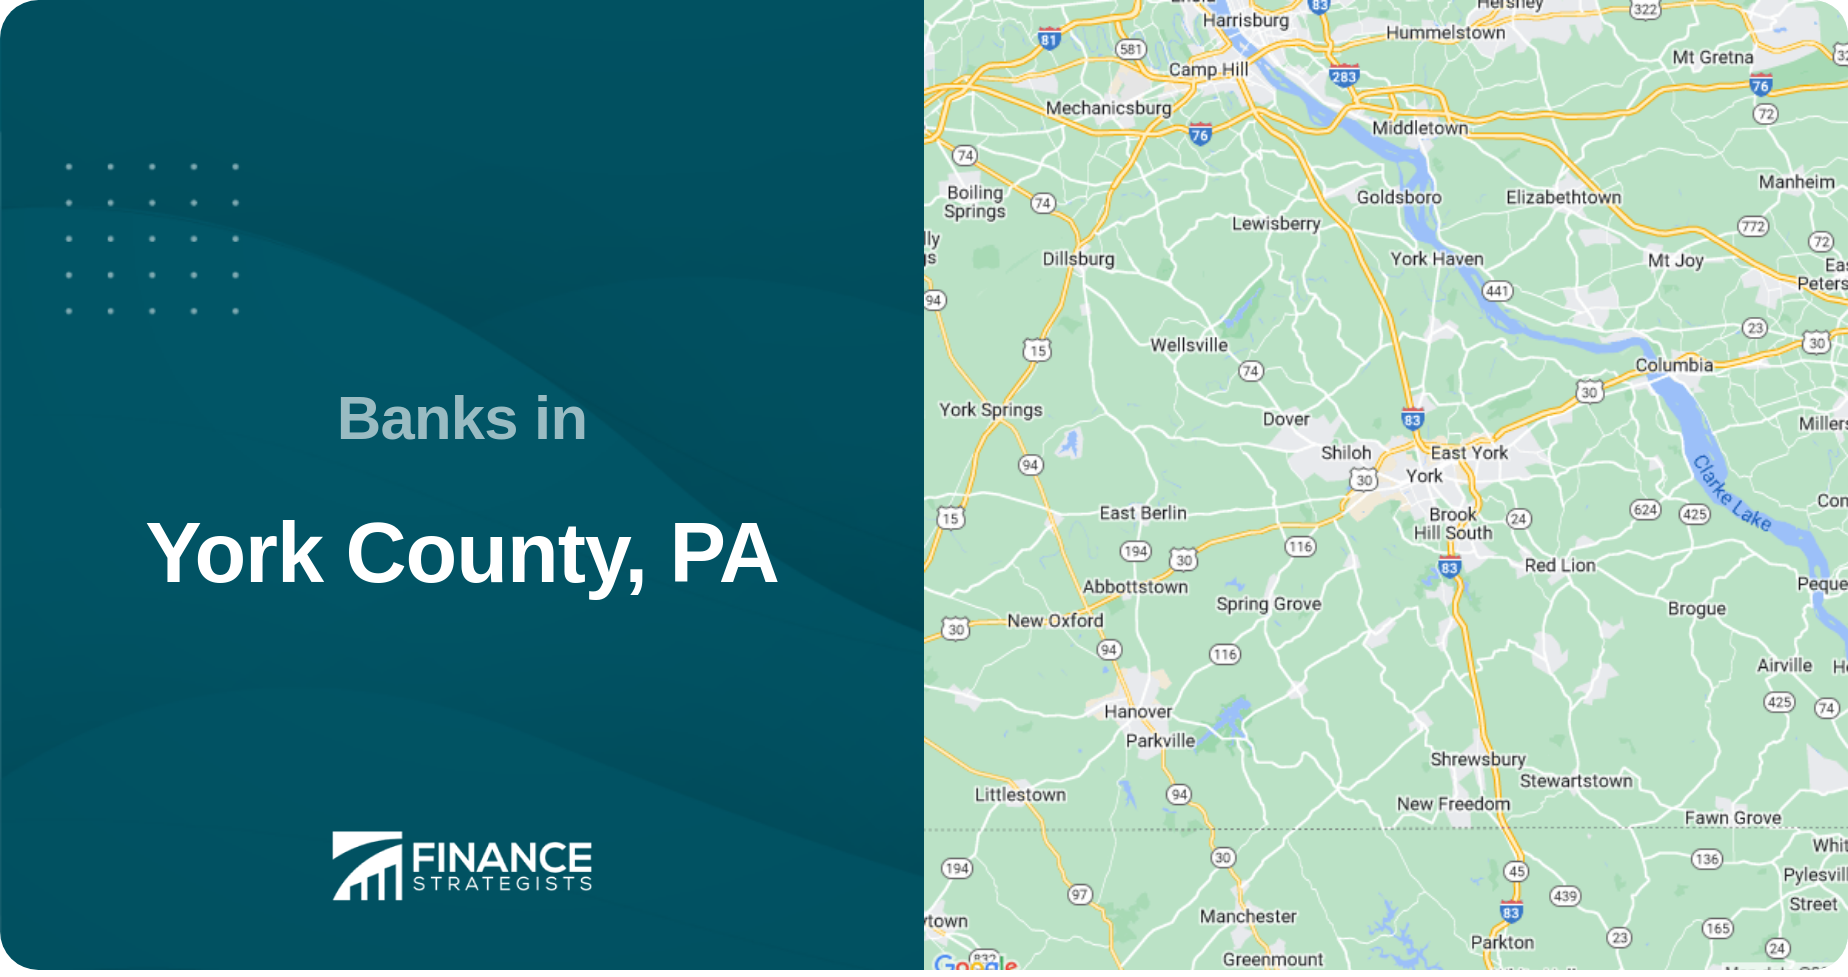 Banks in York County, PA